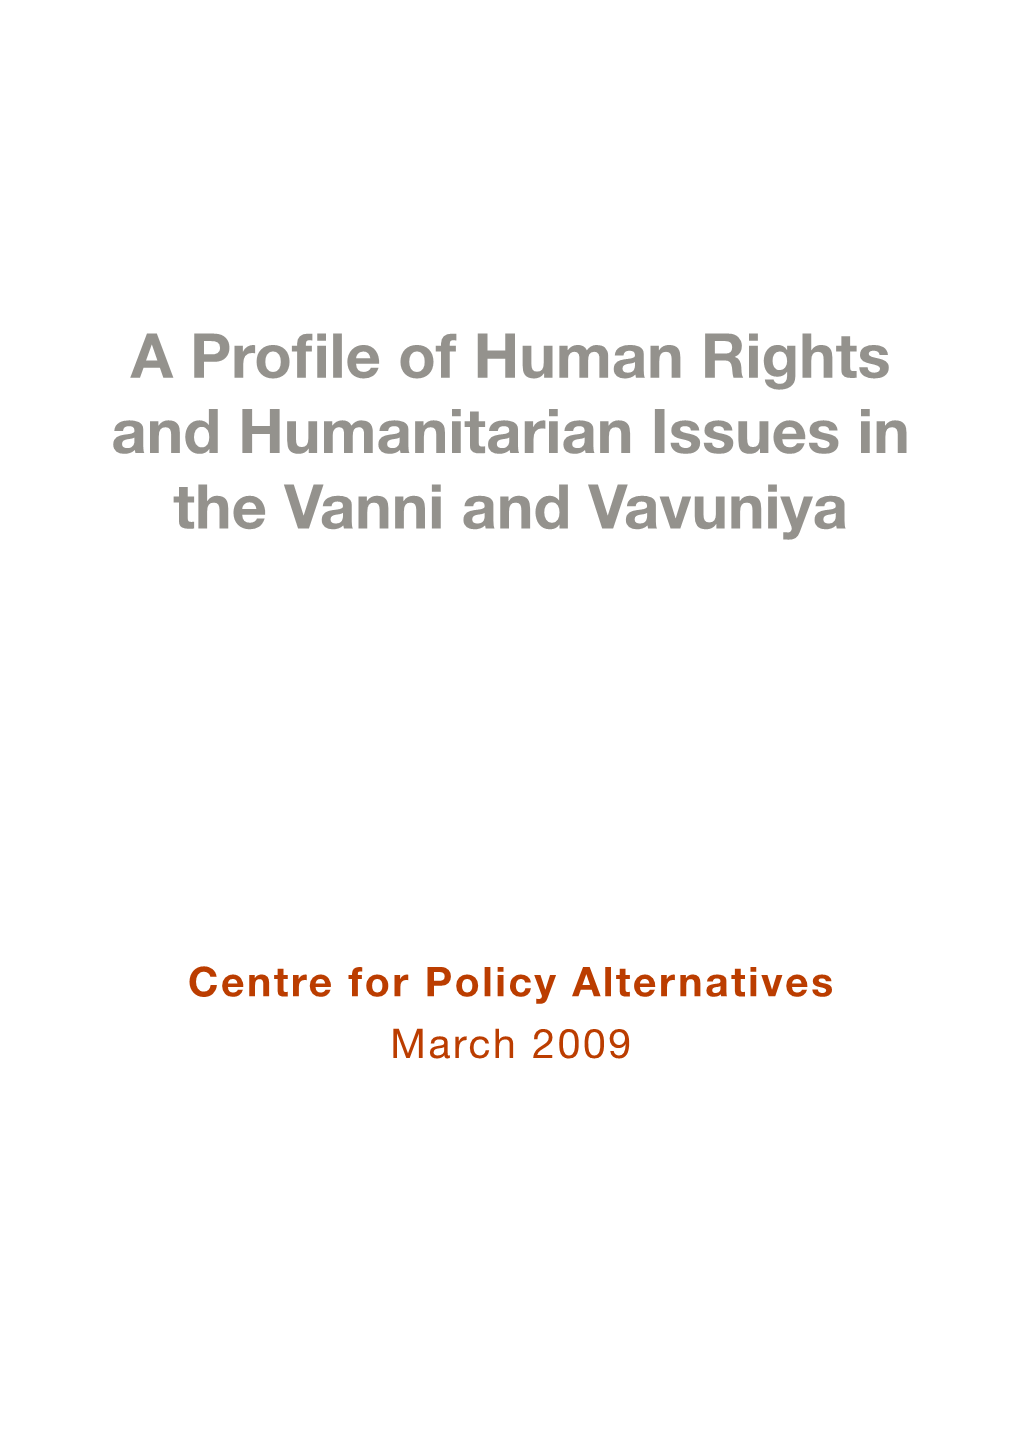 A Profile of Human Rights and Humanitarian Issues in the Vanni